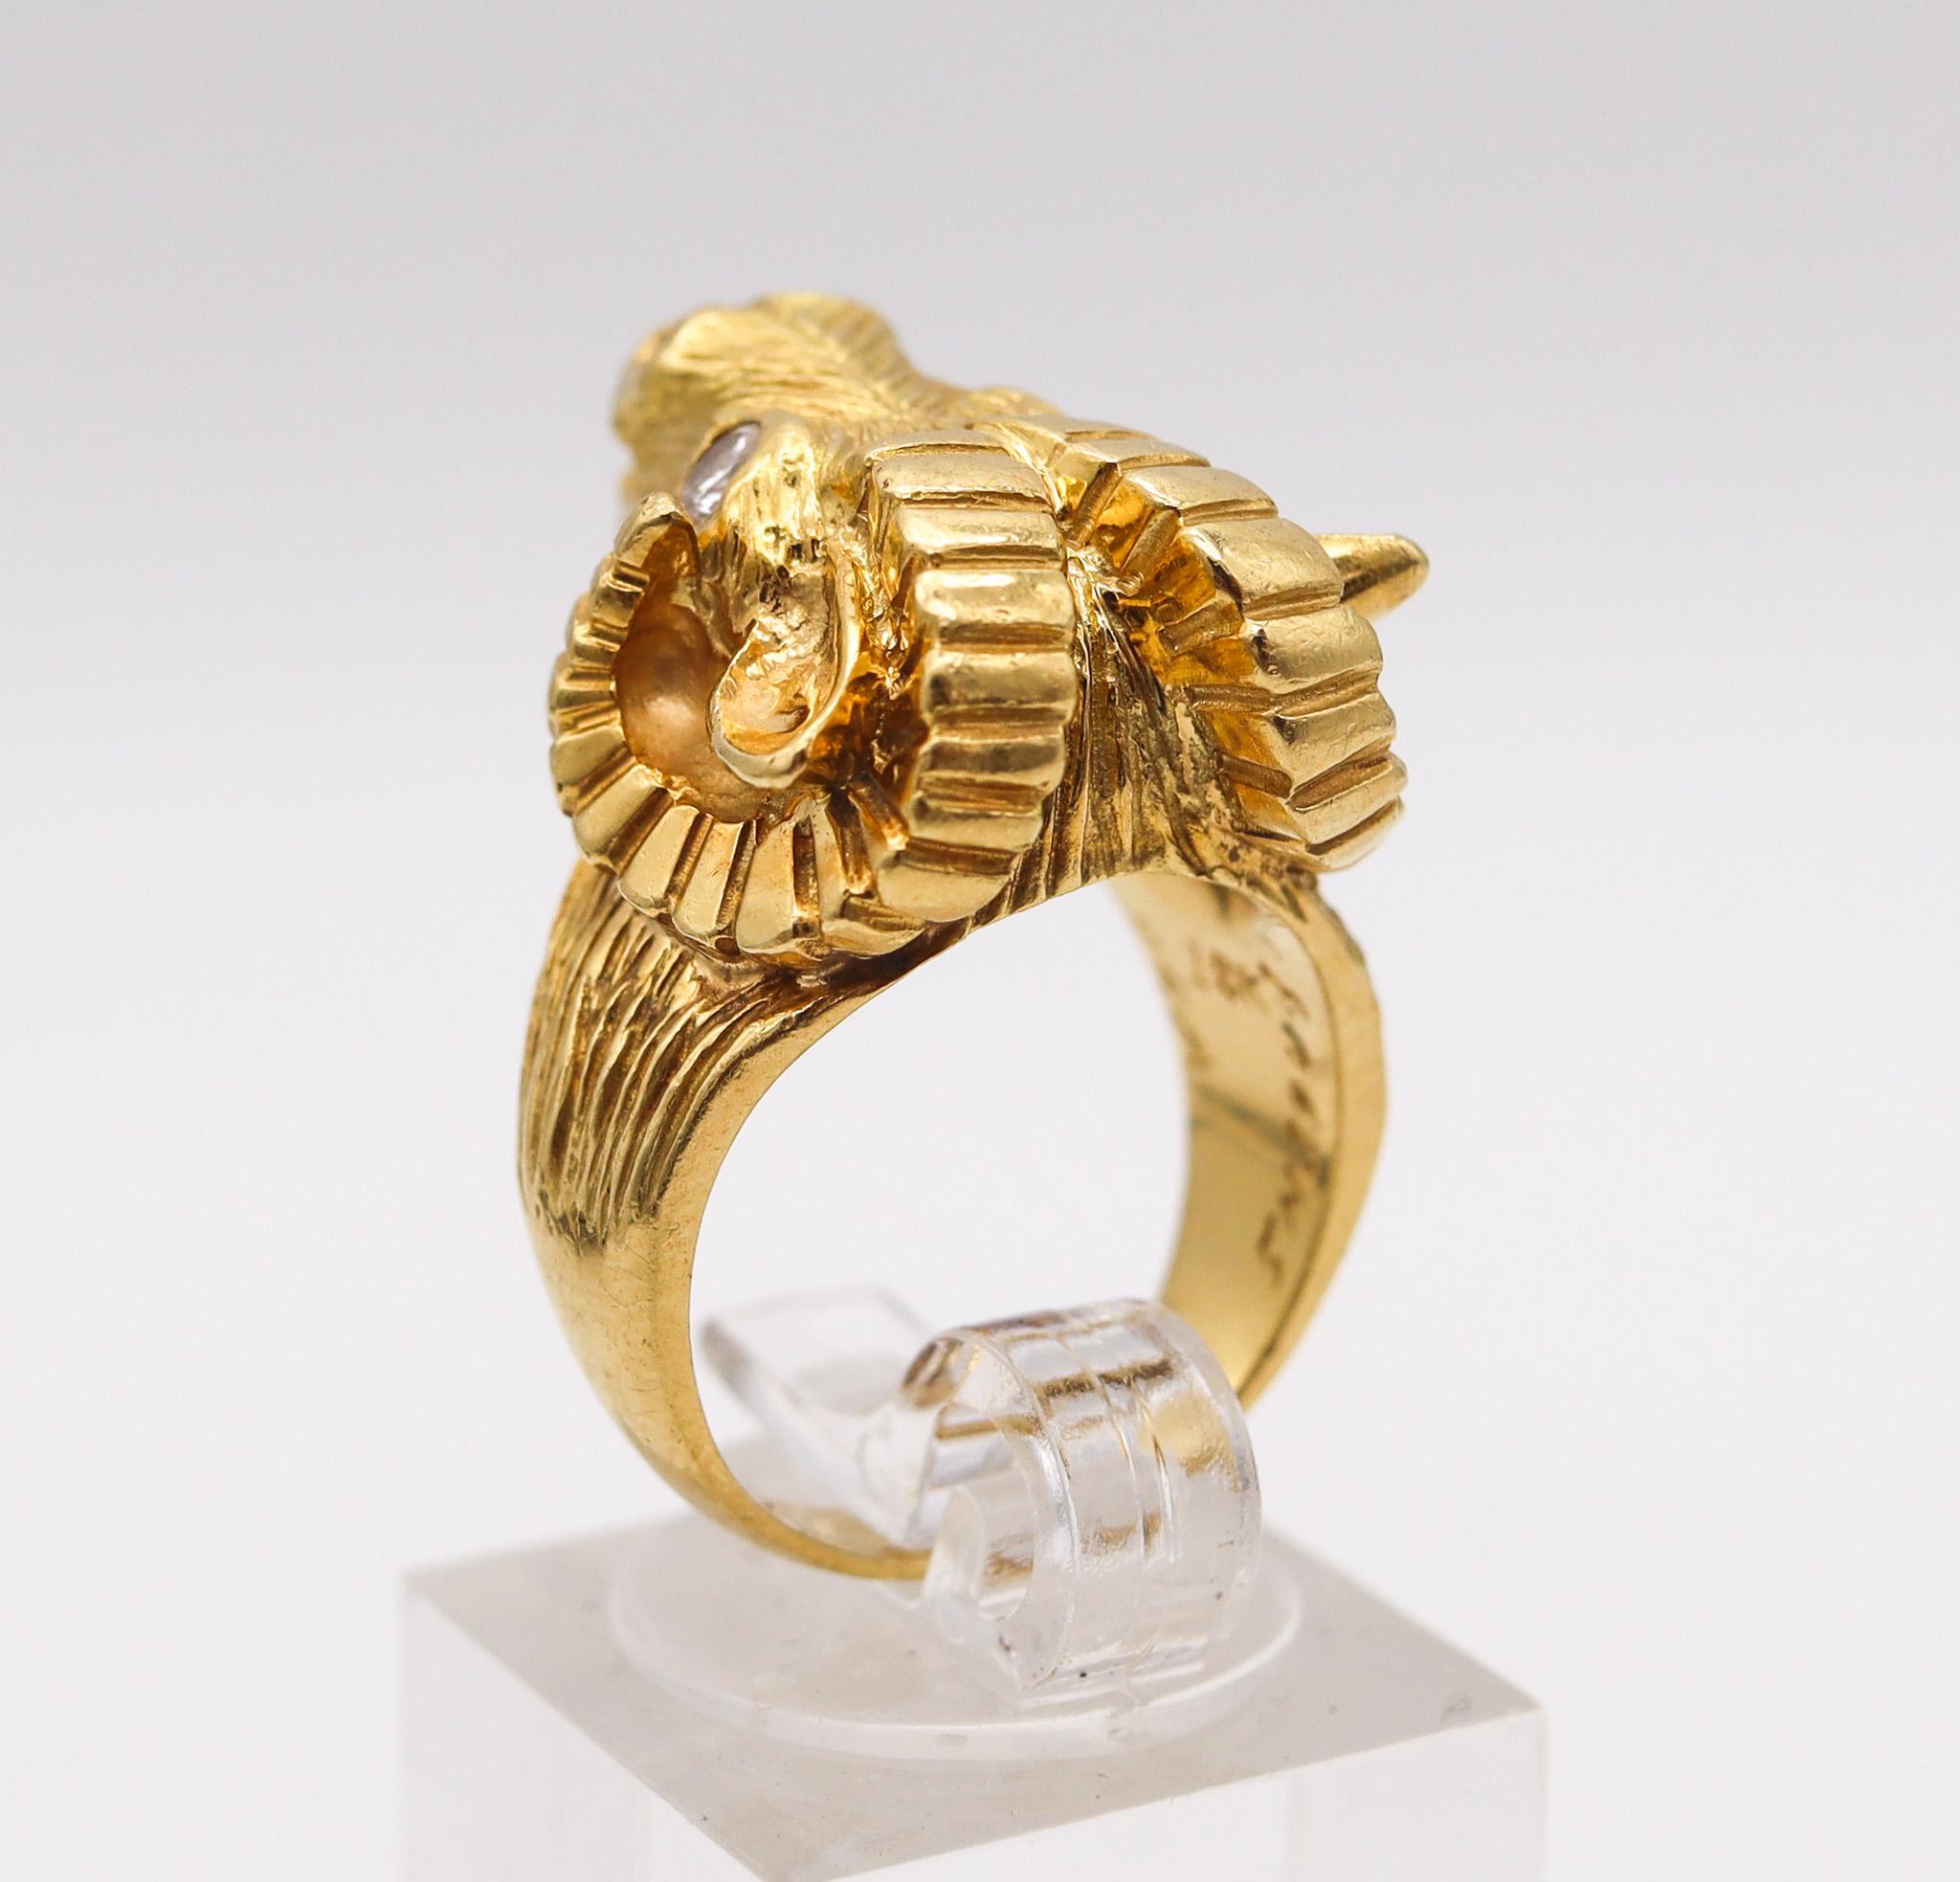 Brilliant Cut Van Cleef & Arpels 1970 Taurus Zodiacal Ring In 18Kt Gold With Two Diamonds For Sale